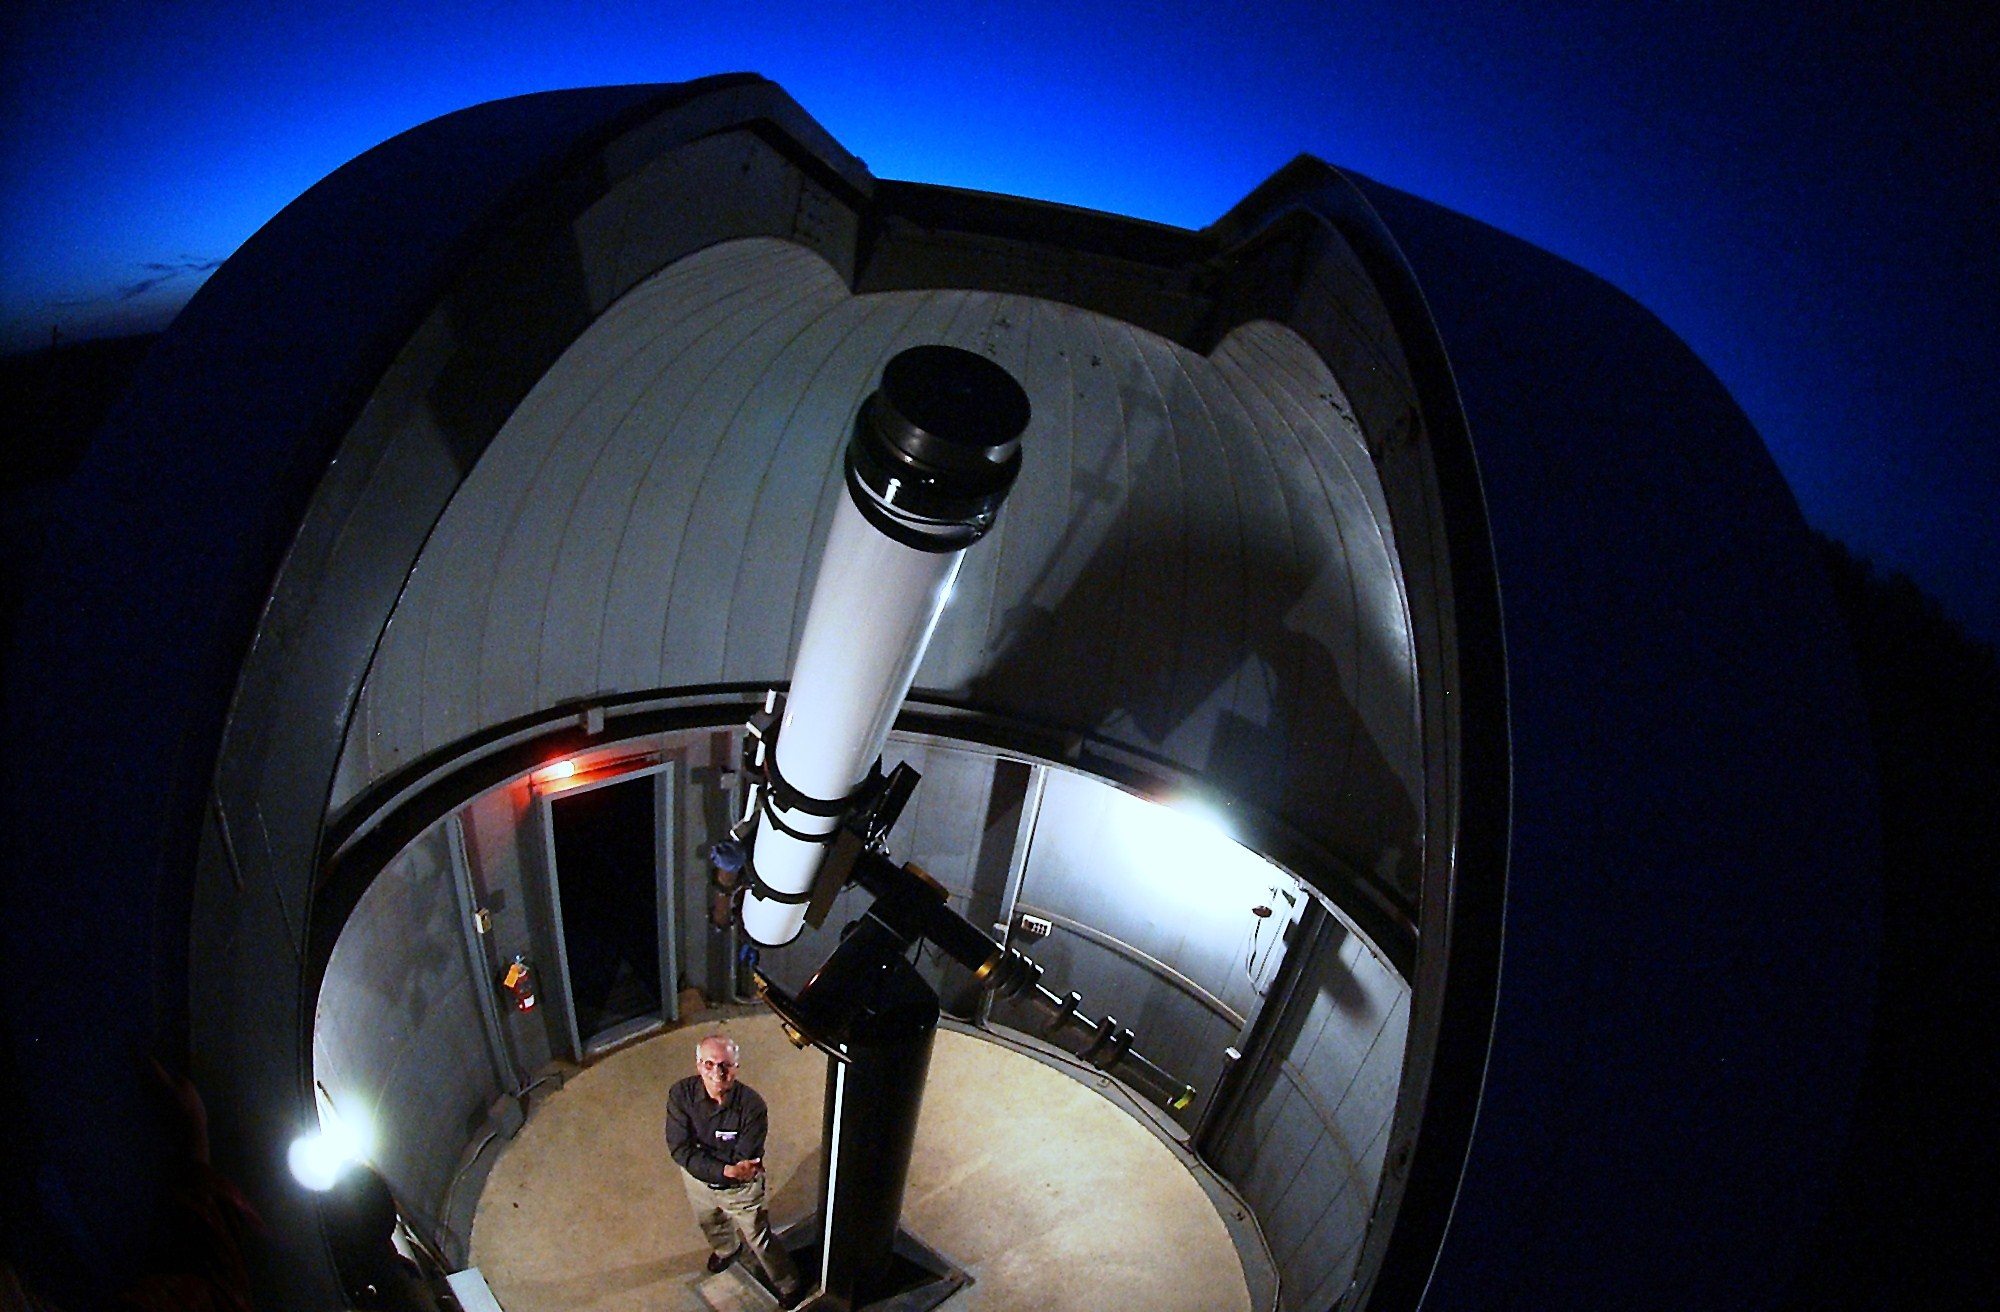 Observatory dome and telescope pictured from overhead